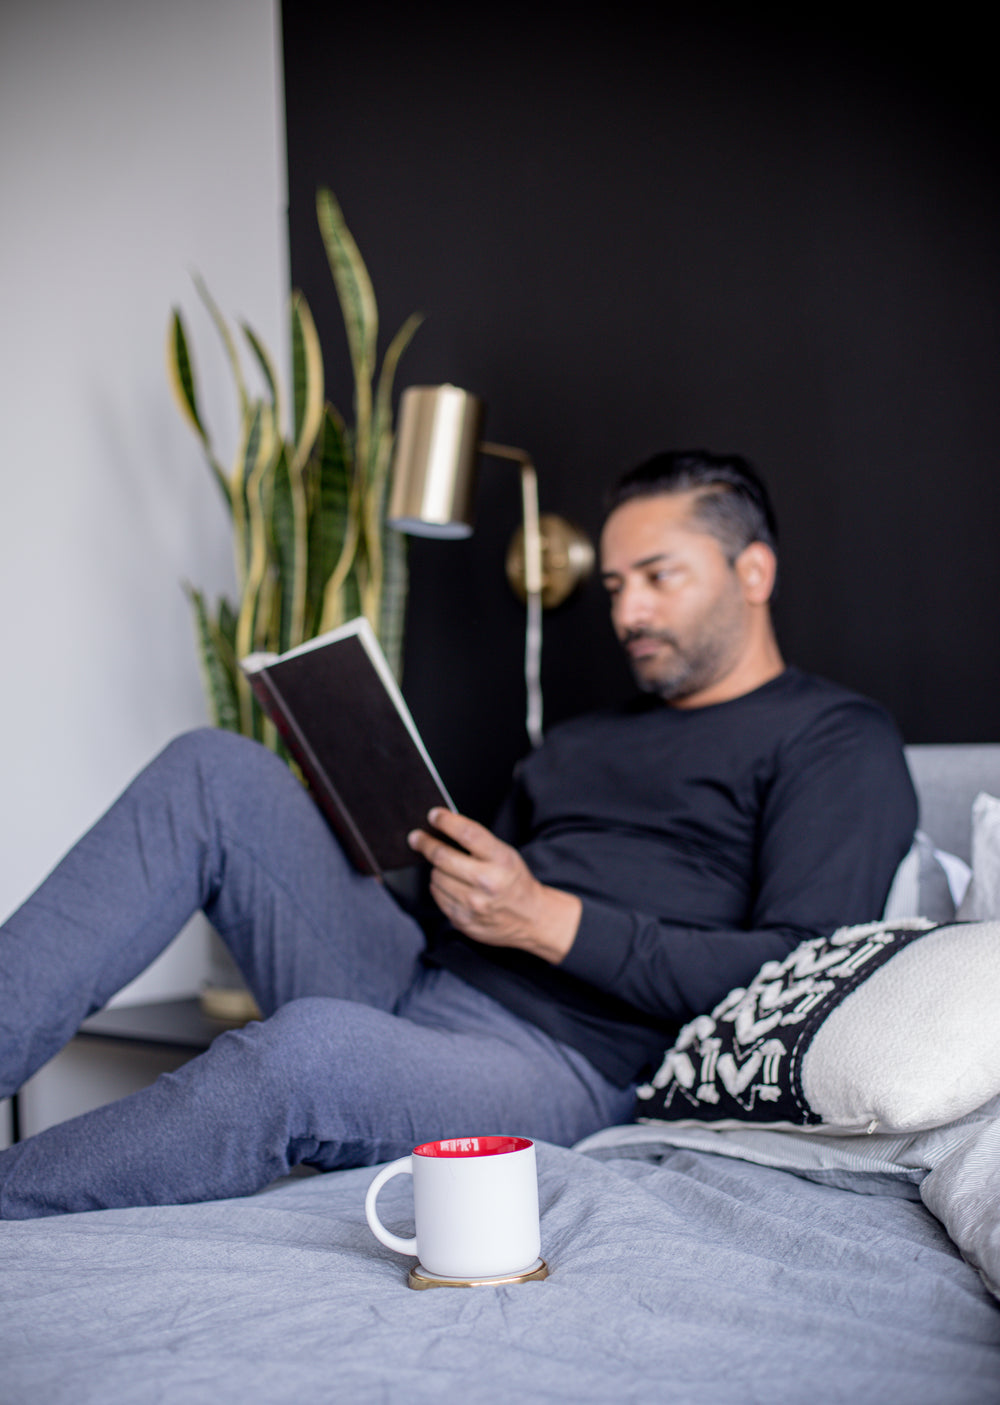 mug on a grey bed with a person reading out of focus